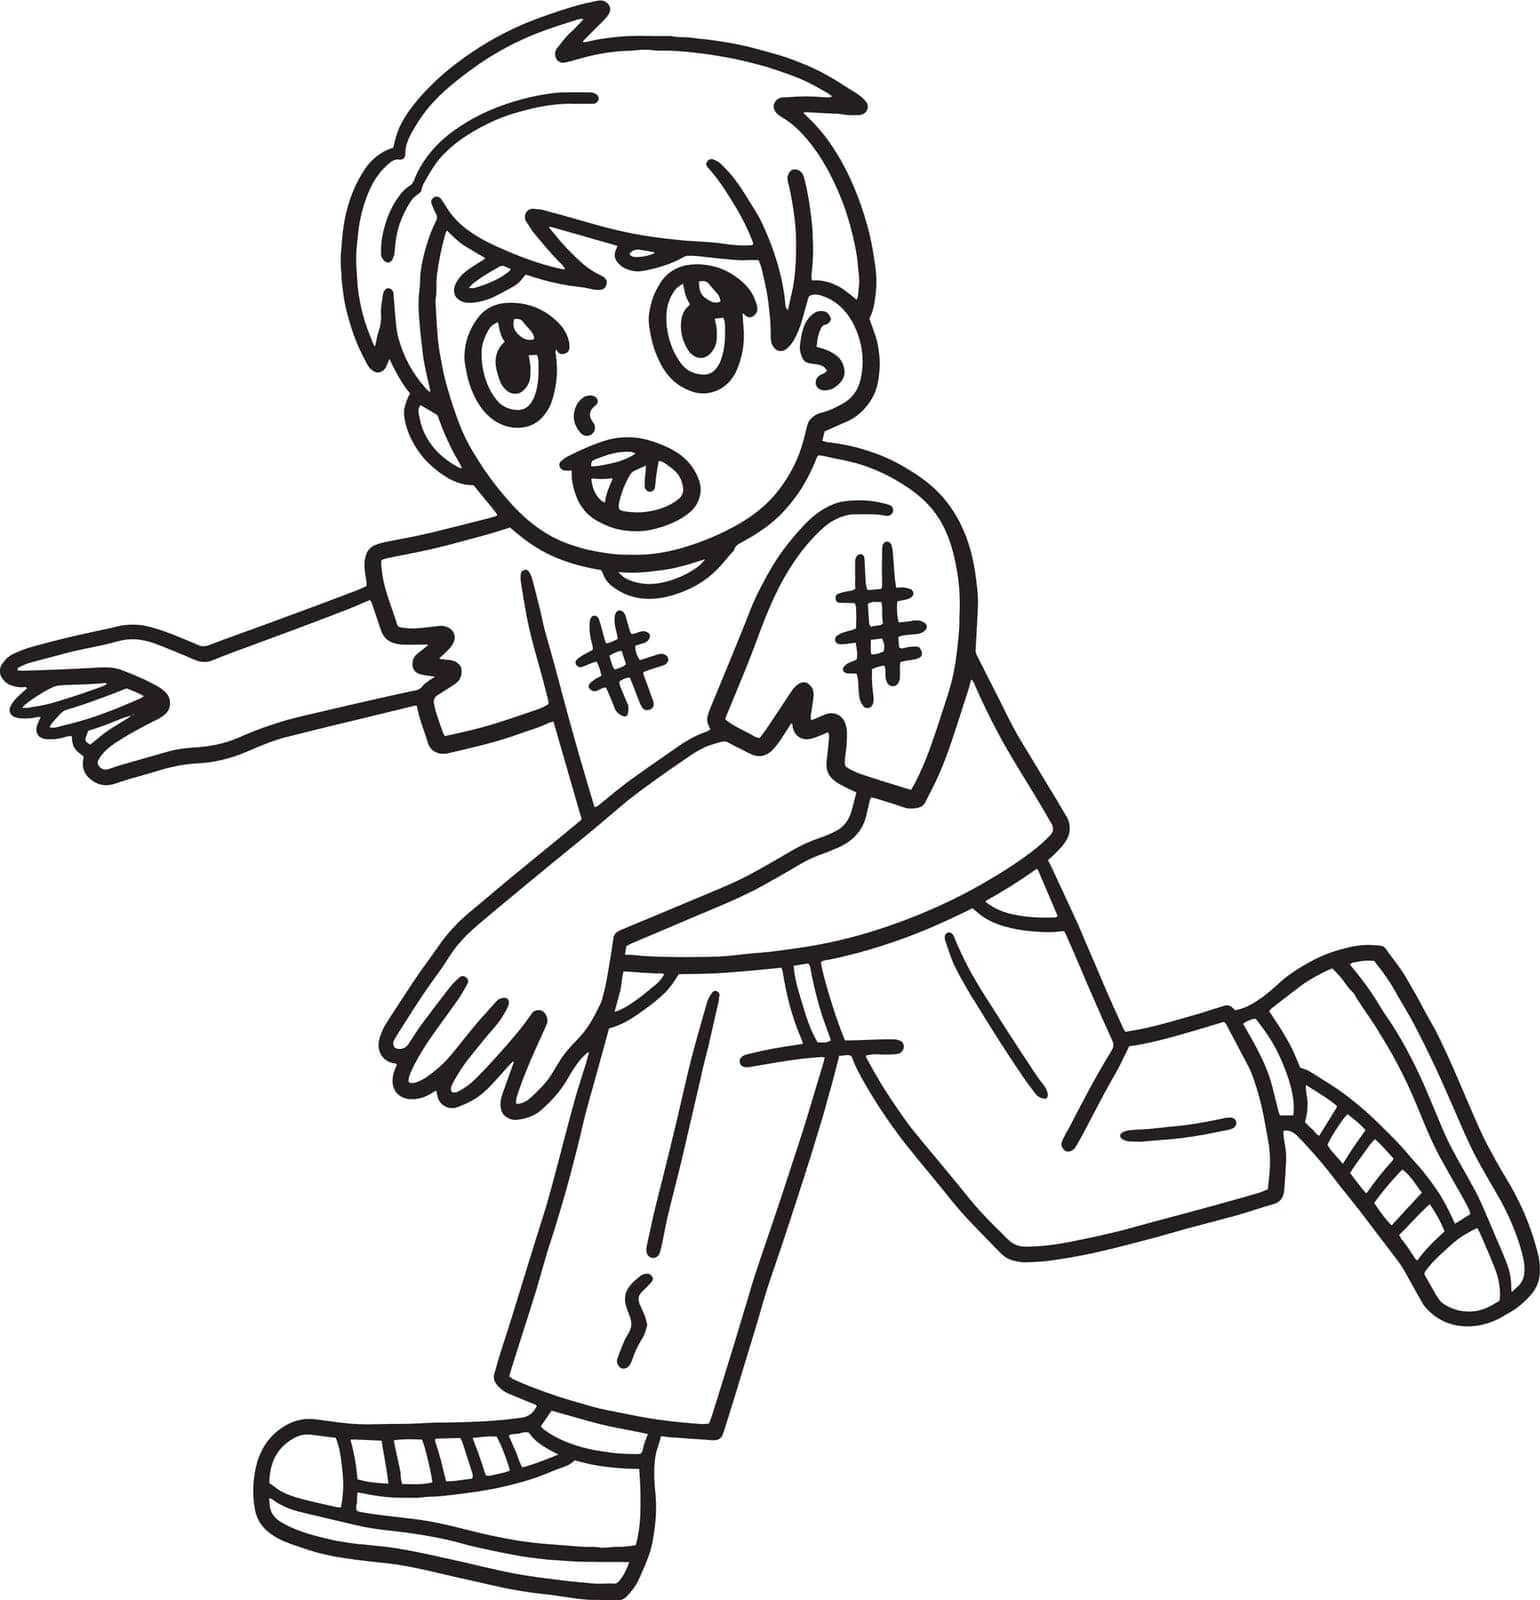 Child Running Isolated Coloring Page for Kids by abbydesign